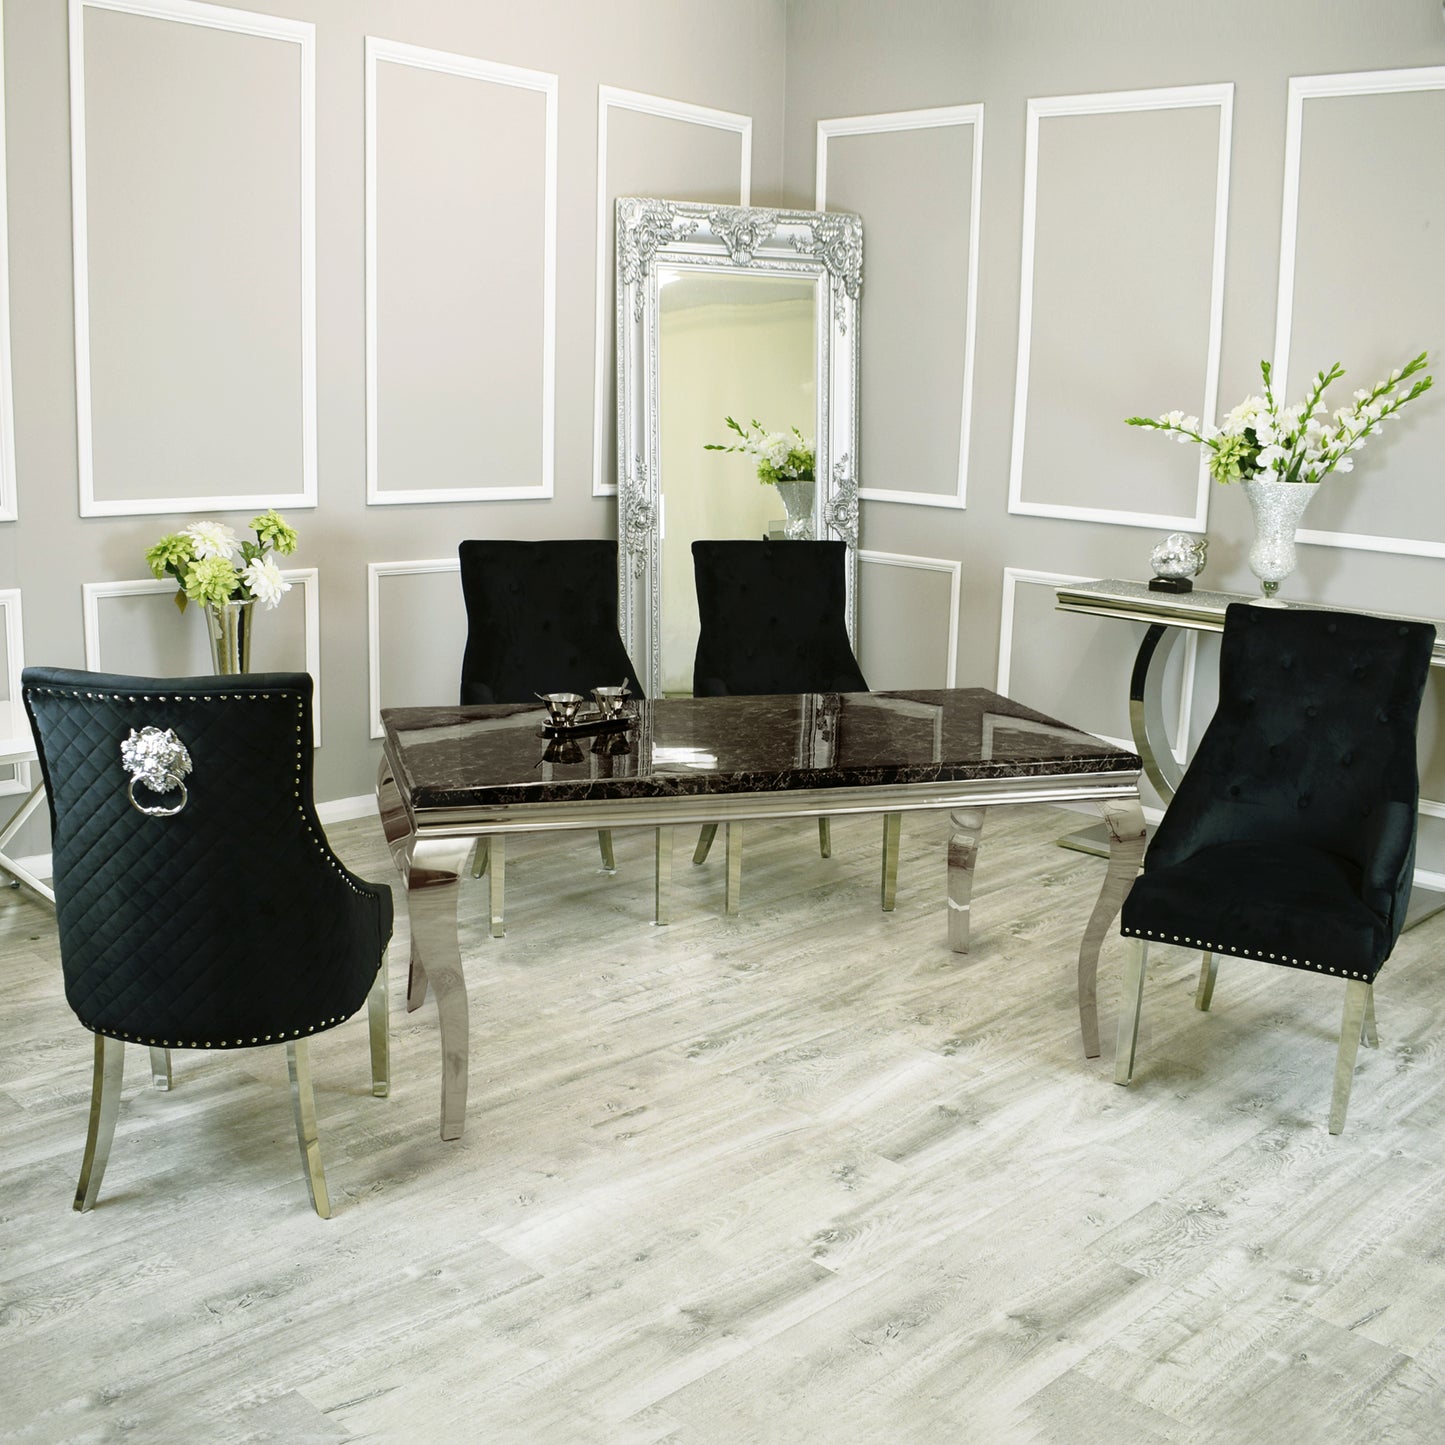 Riviera Black Marble Table with Black Leo Chairs